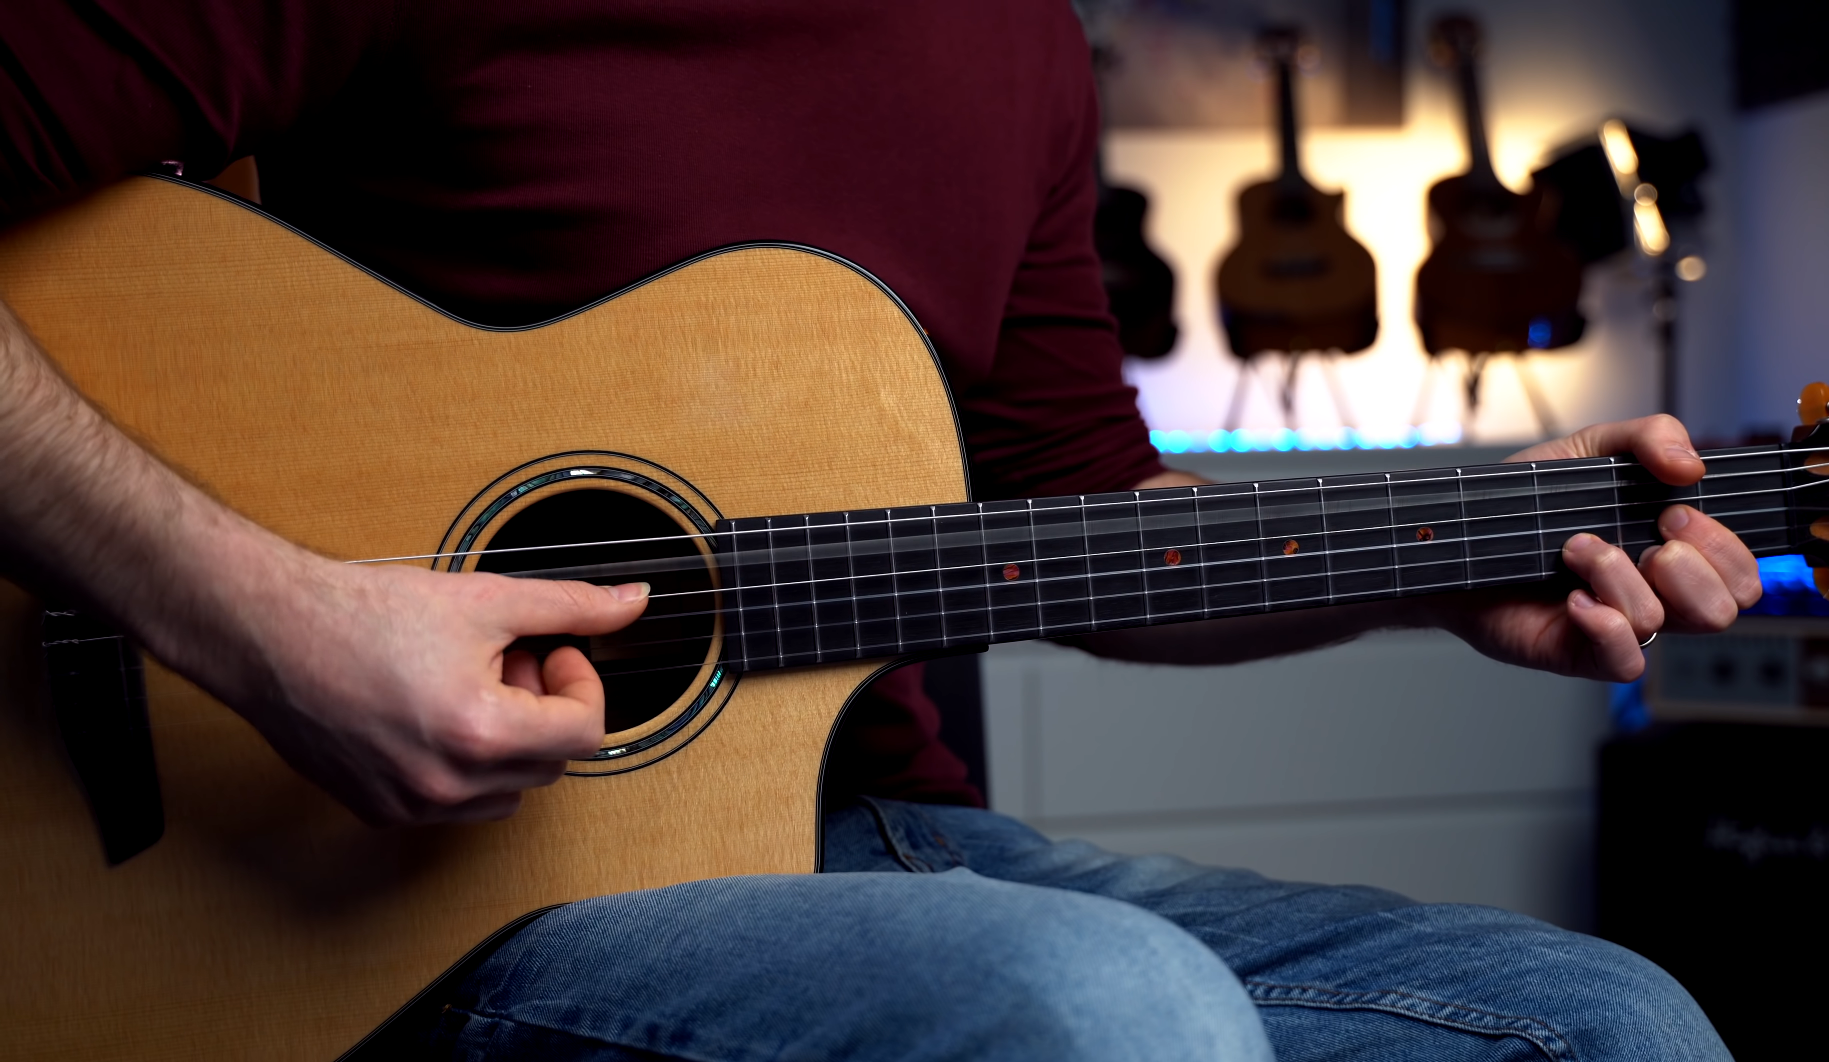 Easy Tips on Playing Spanish Songs on Guitar